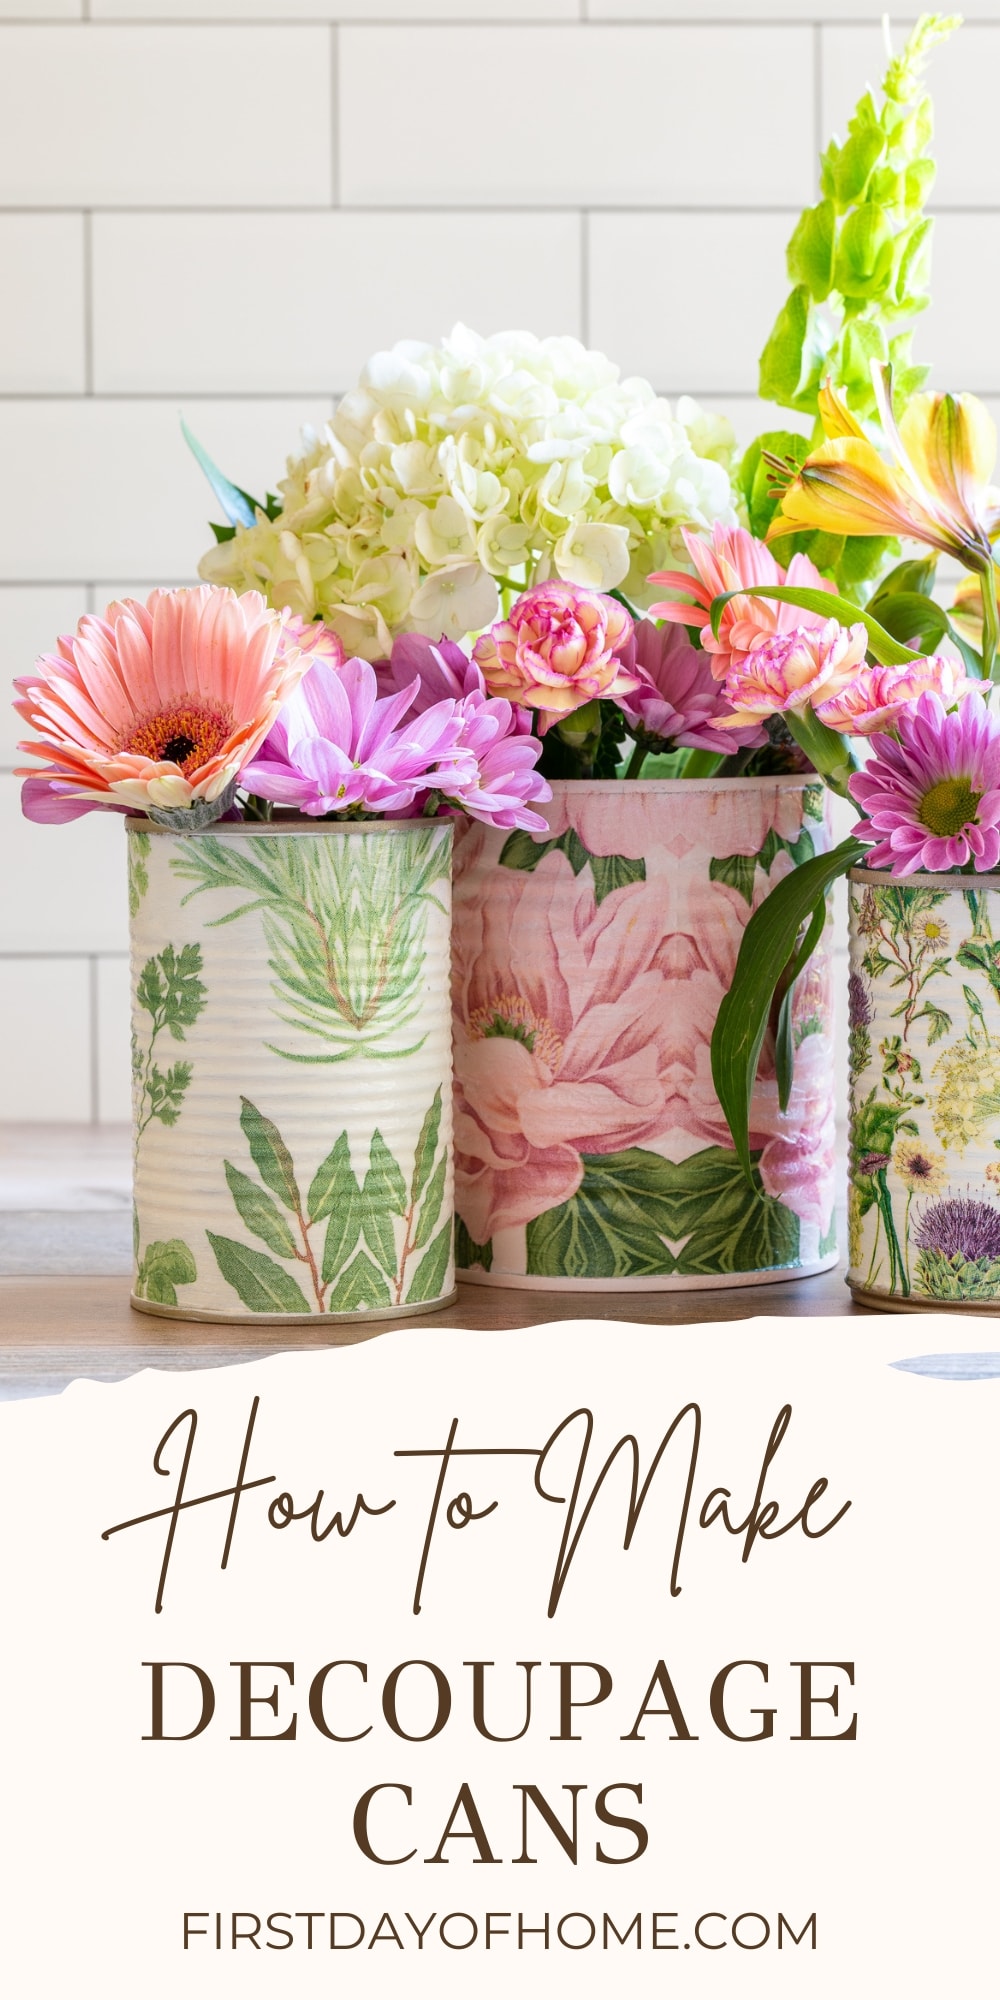 Decoupage cans filled with flowers. Text overlay reads "How to Make Decoupage Cans".